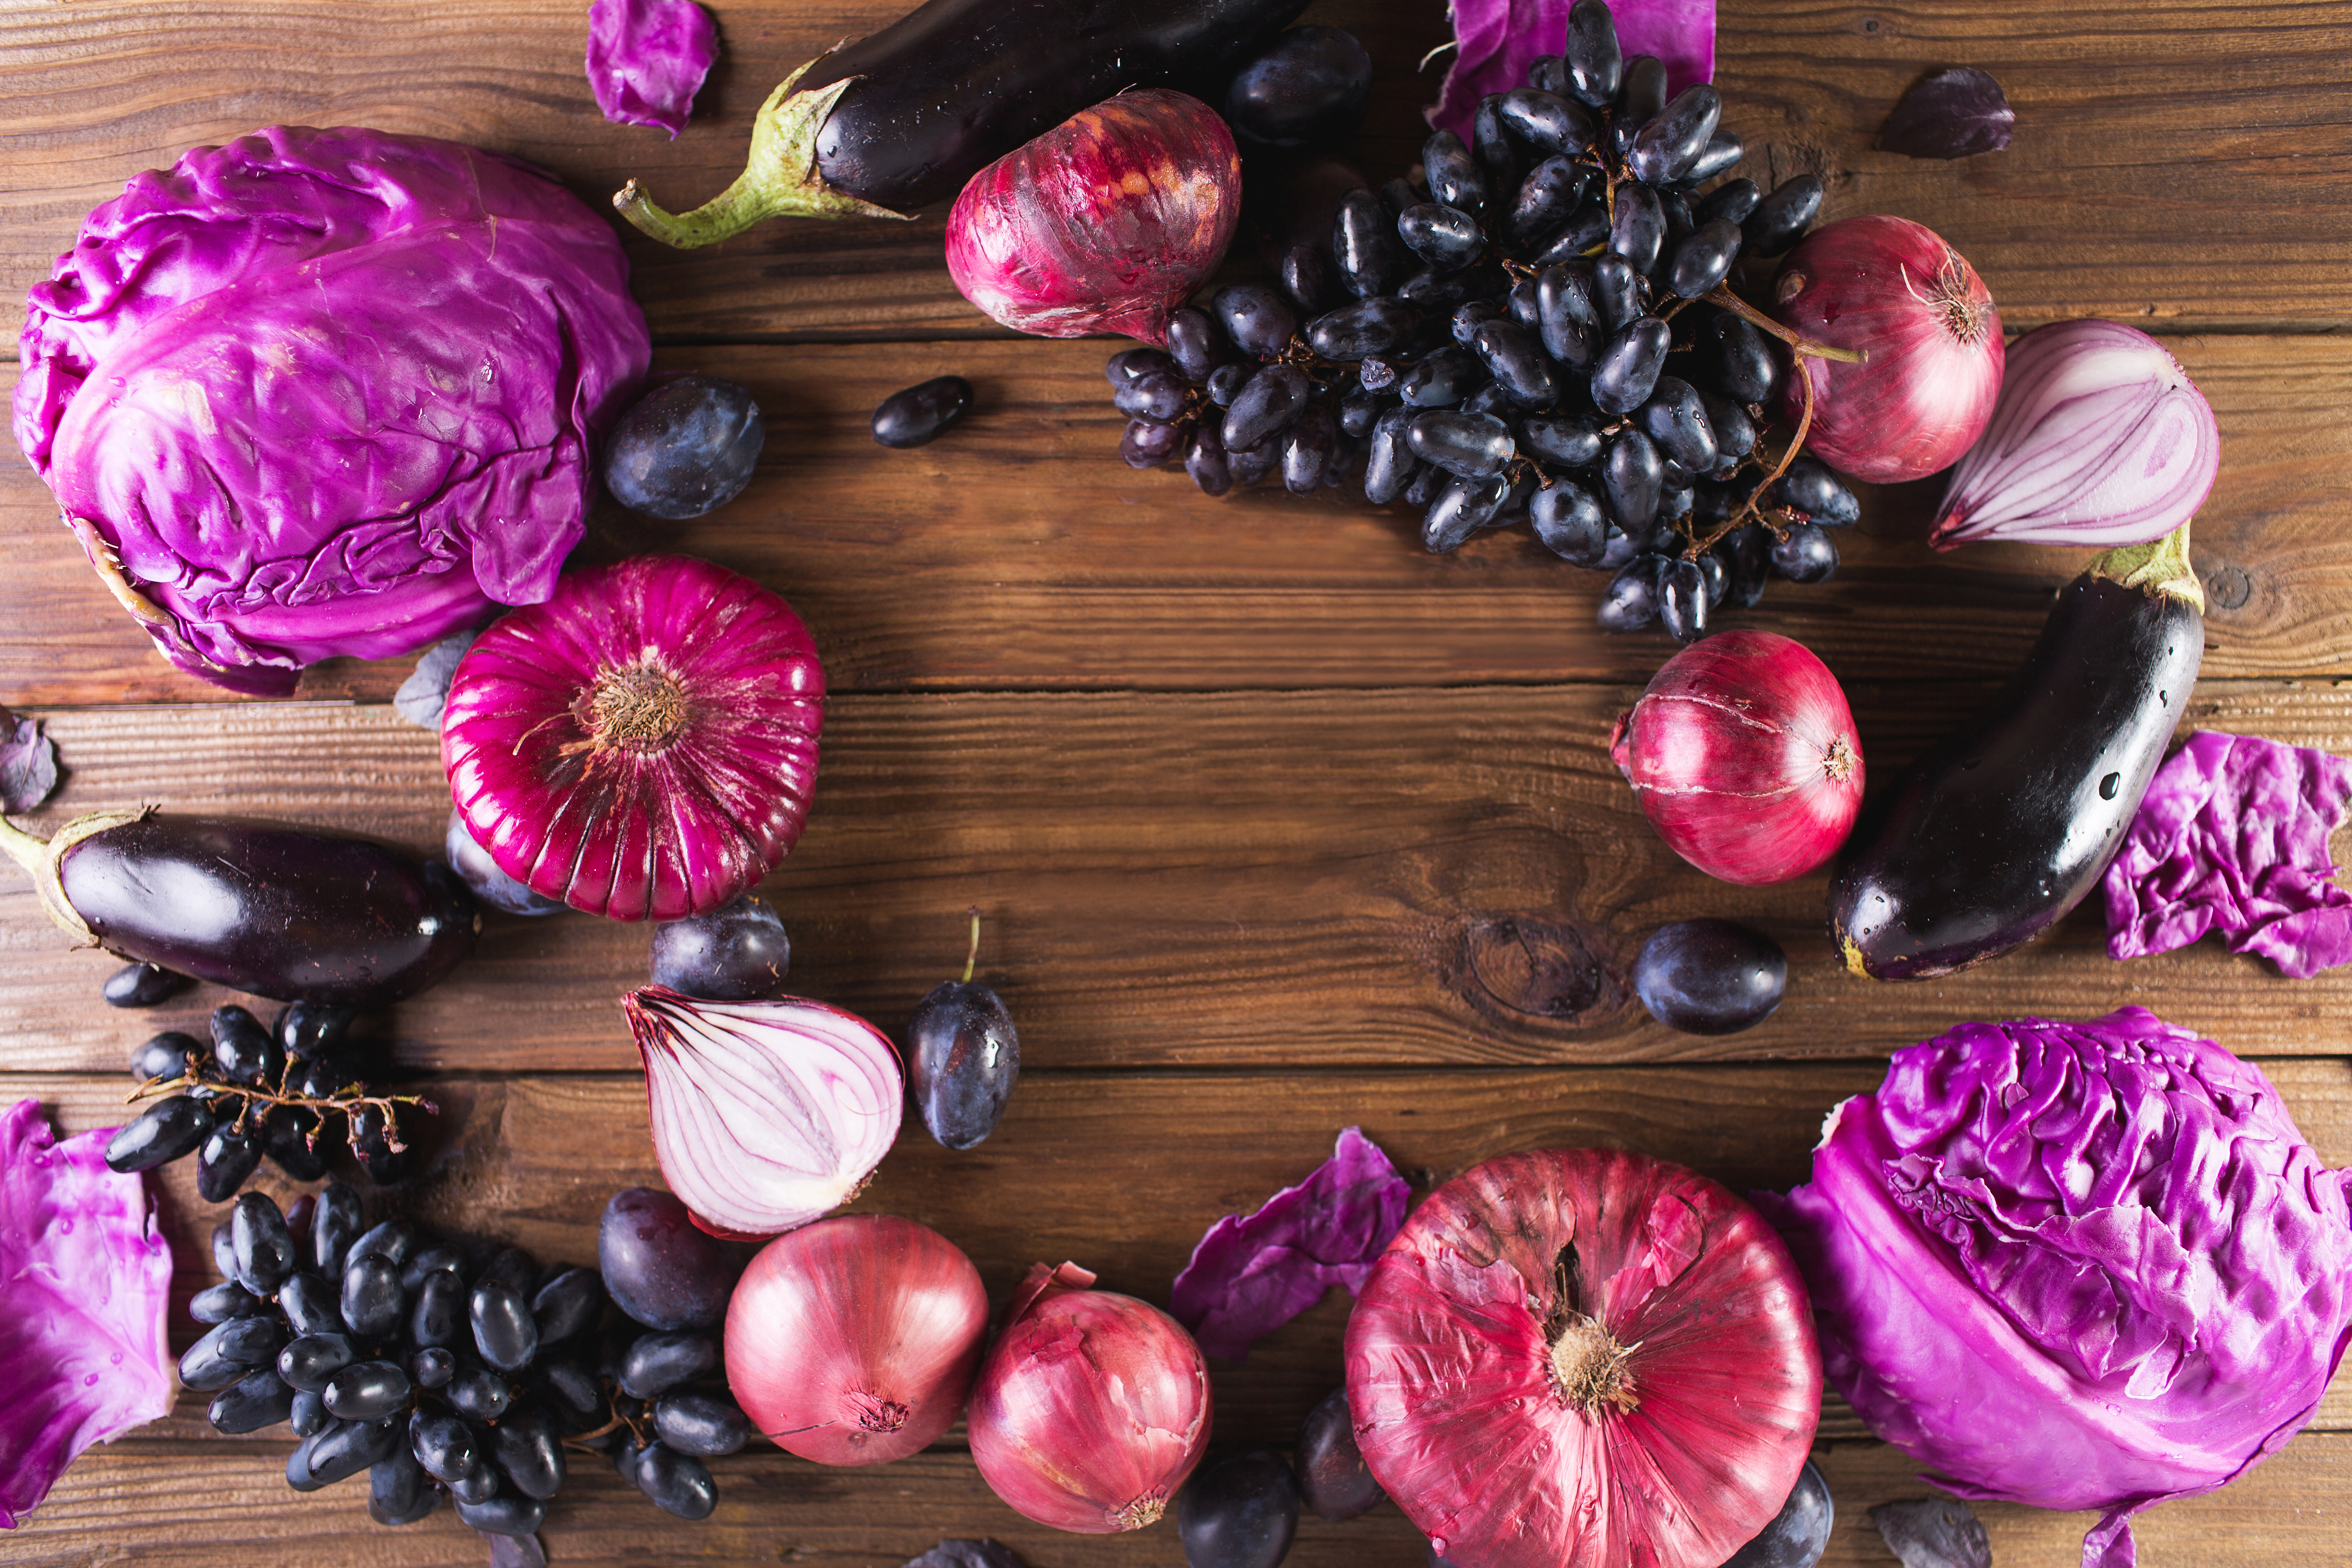 The 2018 Pantone Color of The Year, Ultra Violet Serves As Our Favorite Superfoods